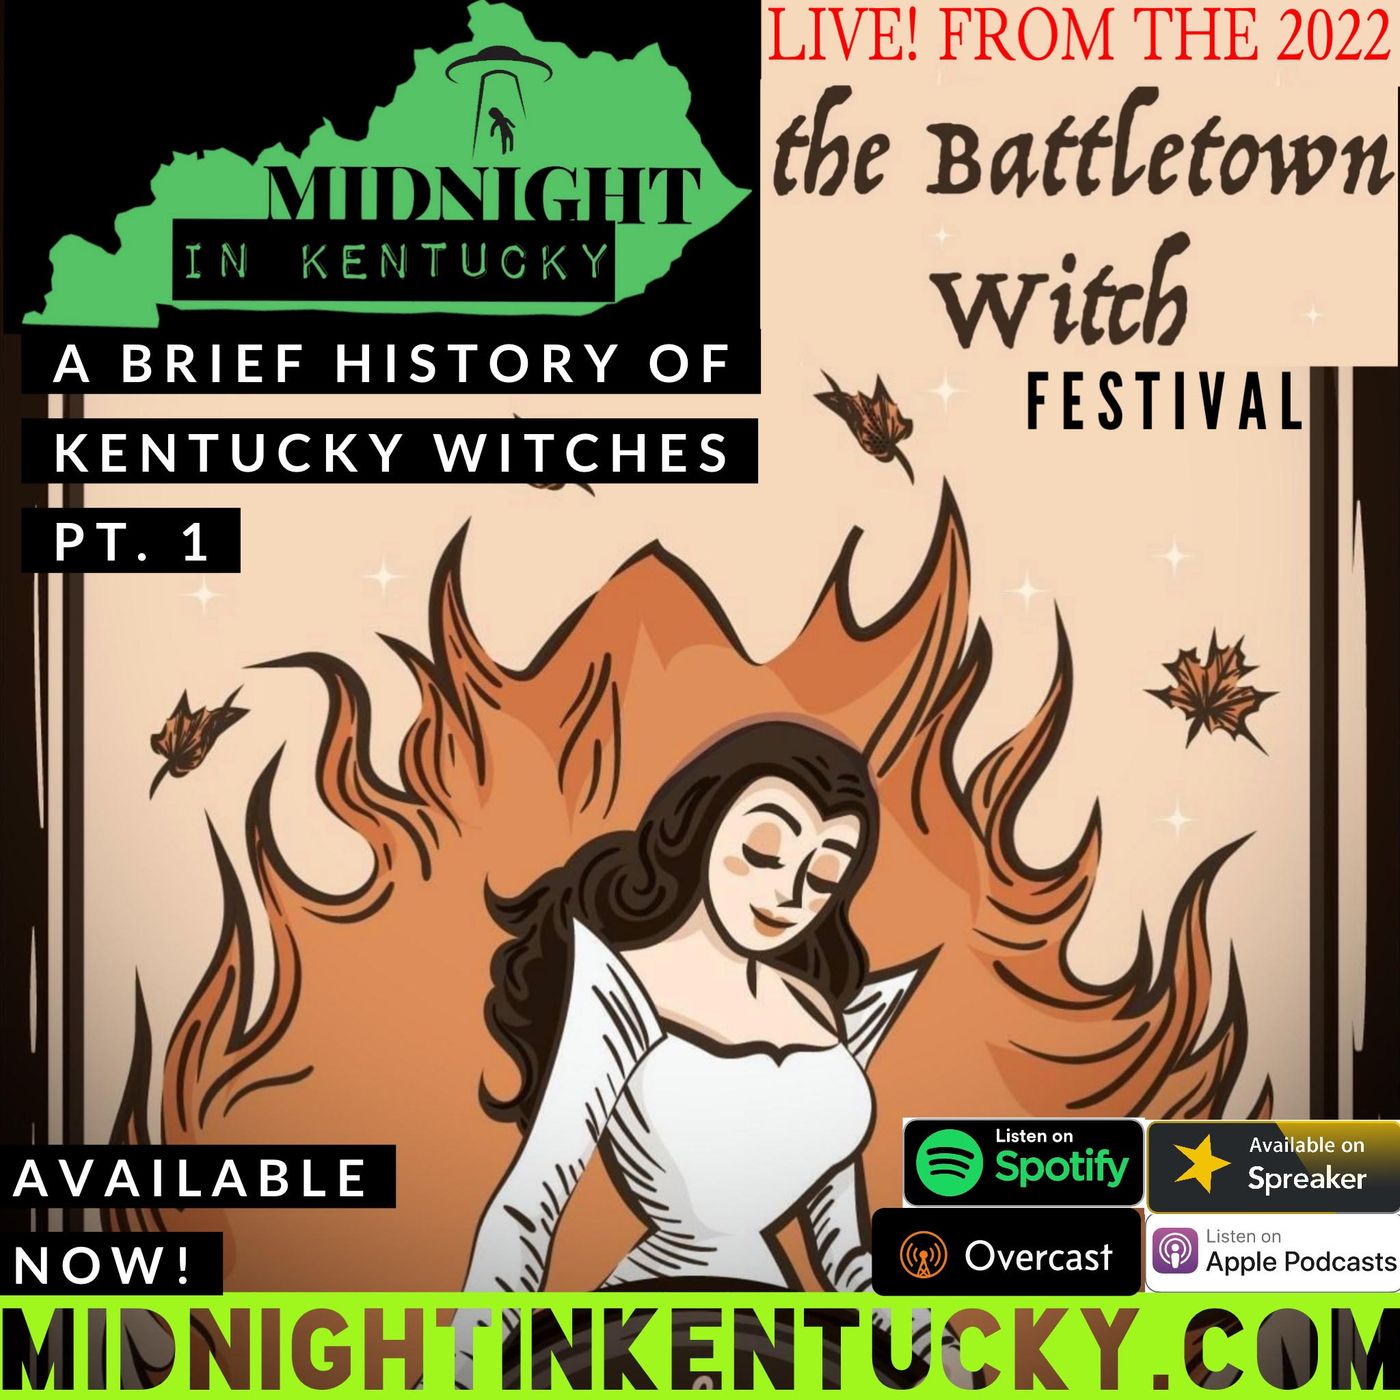 A Brief History of Kentucky Witches (Live from the 2022 BattleTown Witch Festival!)